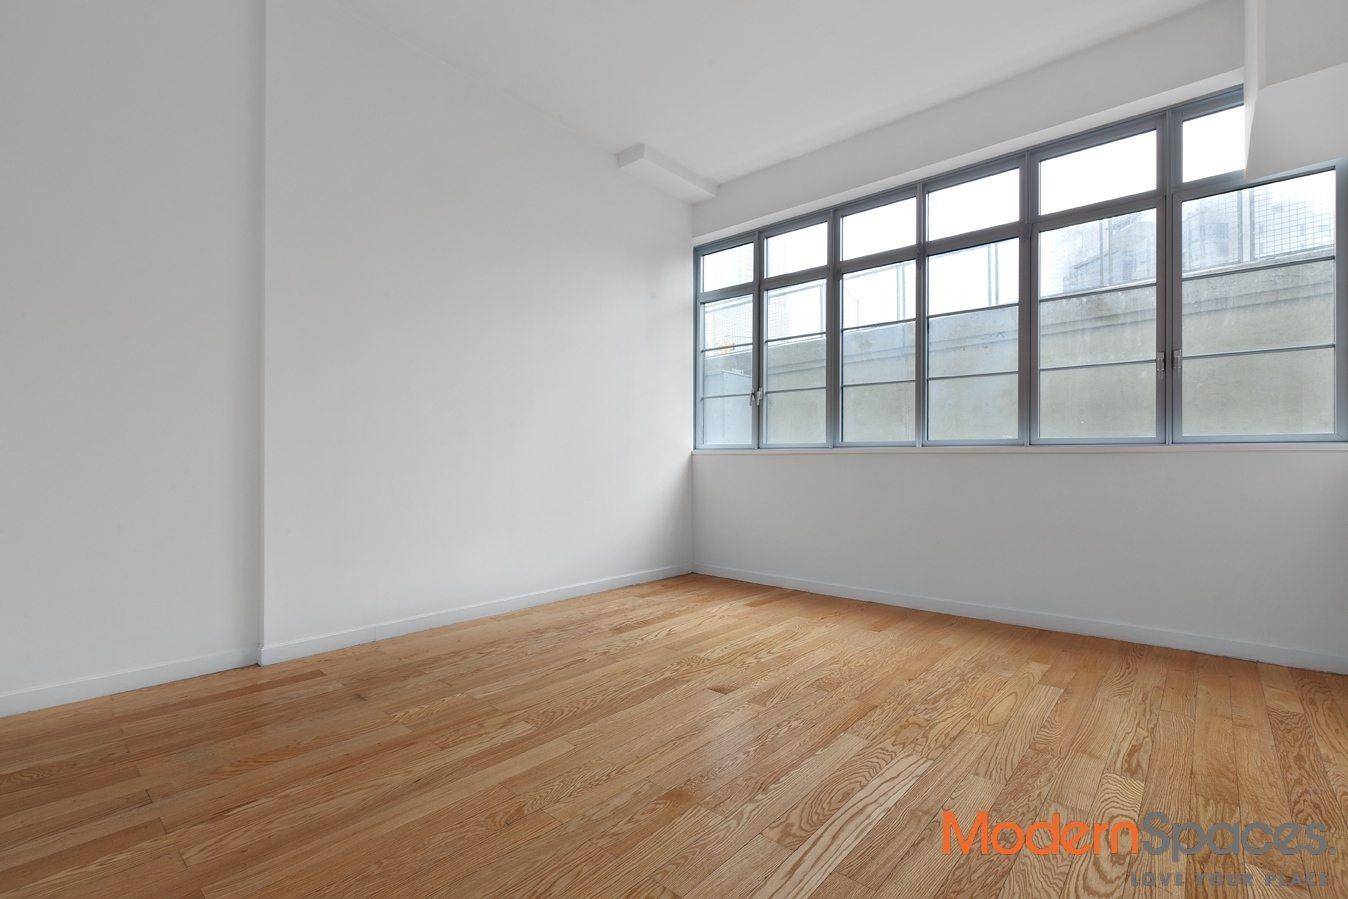 Excellent Opportunity to Own a Commercial Condo in LIC.